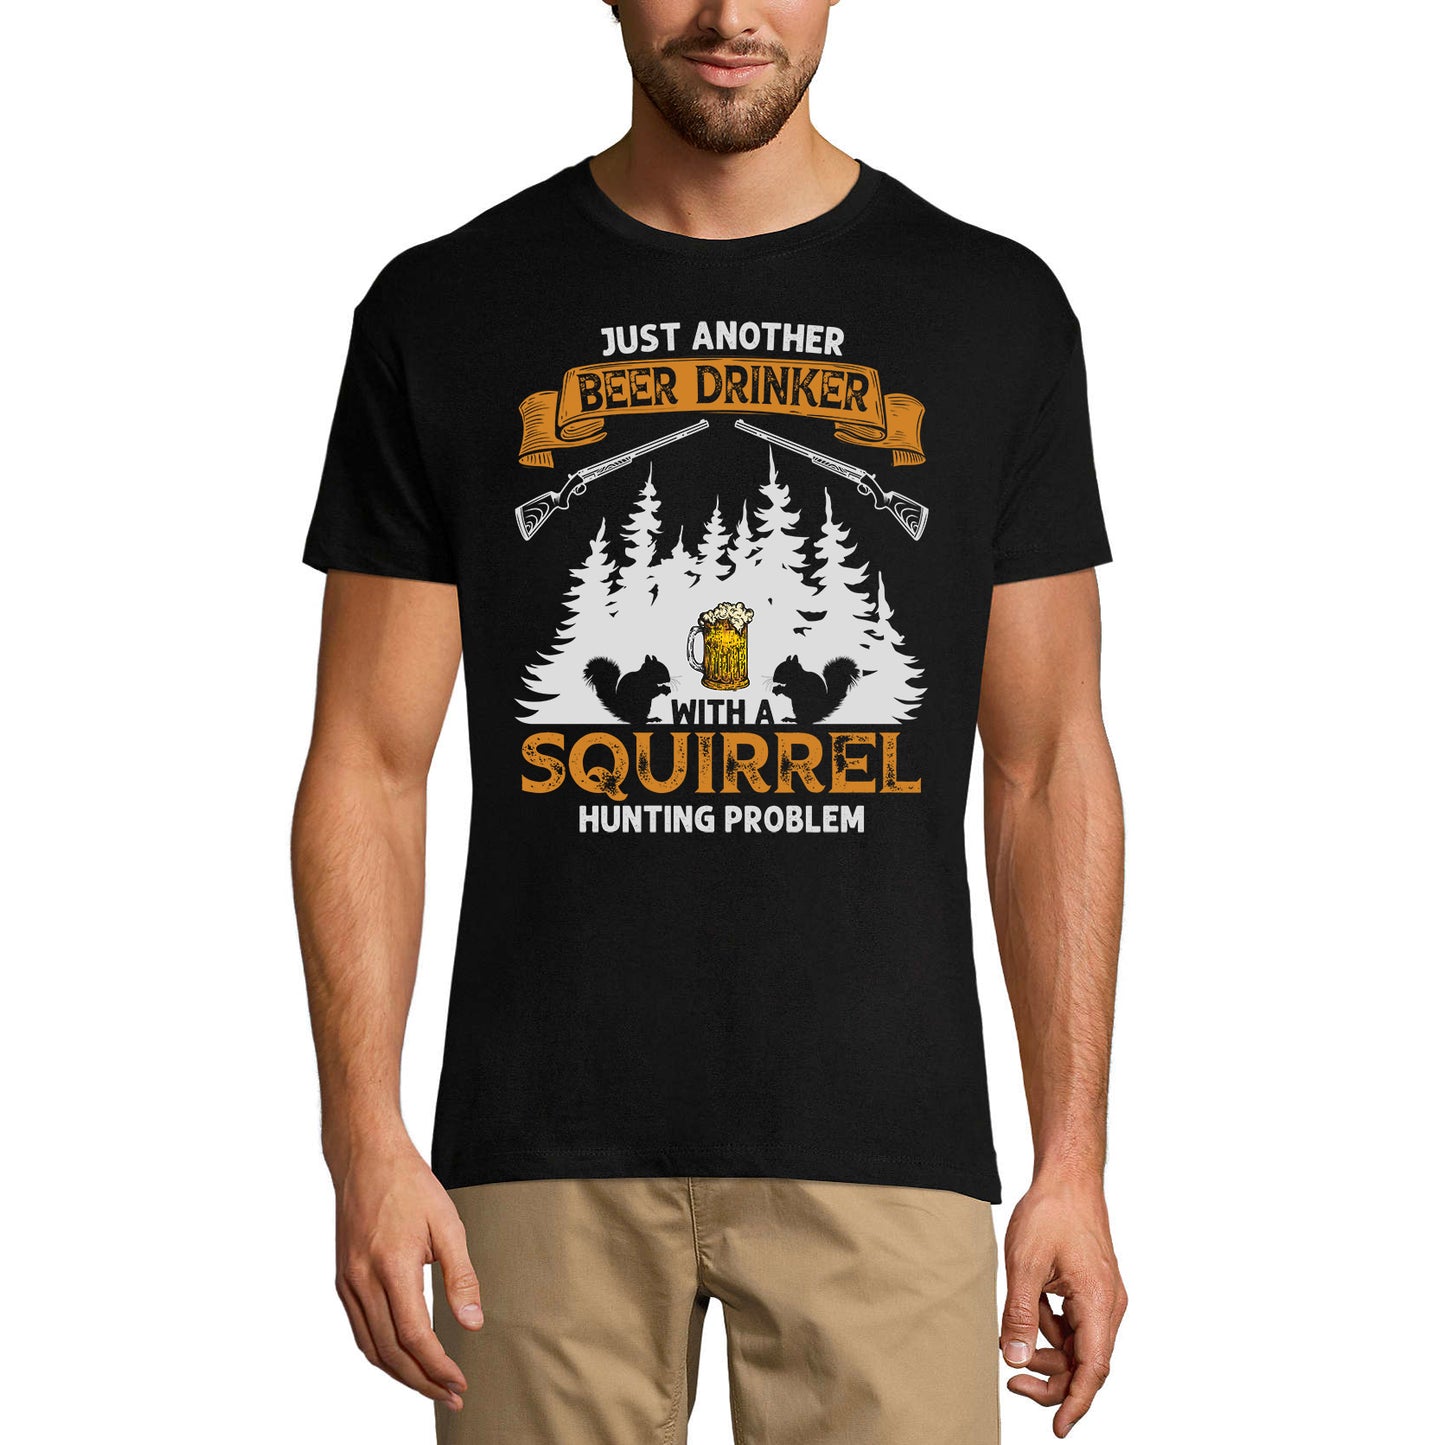 ULTRABASIC Graphic Men's T-Shirt Just Another Beer With a Squirrel Hunting Problem - Vintage Hunter's Tee Shirt